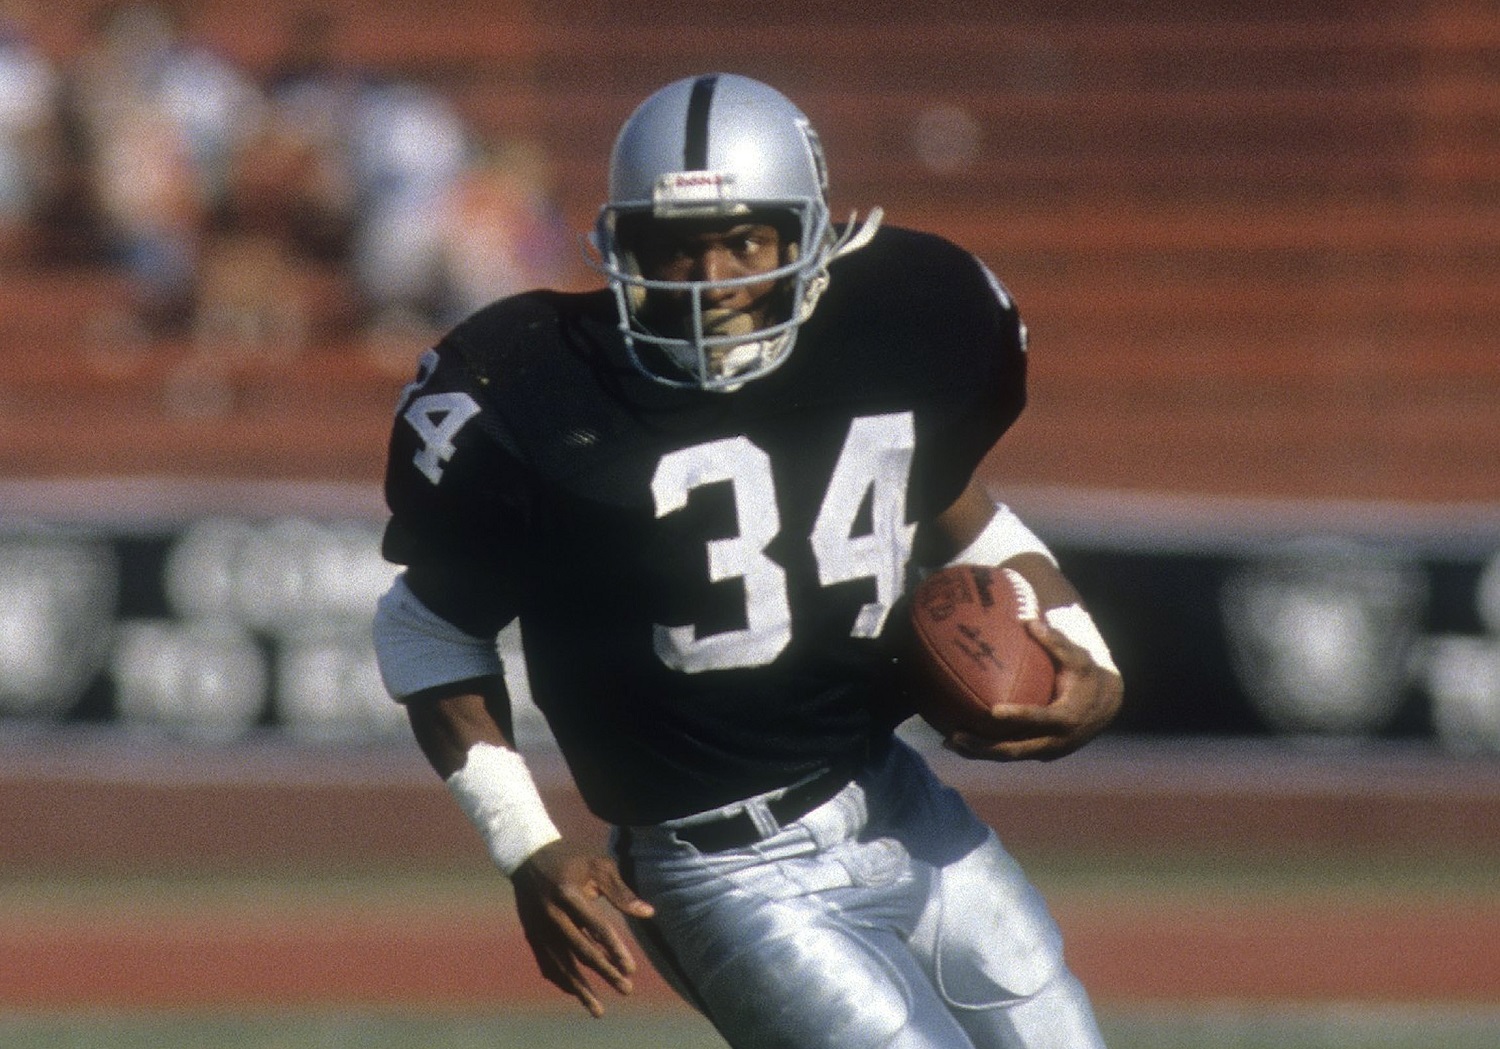 Running back Bo Jackson didn't sign with the Tampa Bay Buccaneers after they made him the No. 1 overall draft pick. He went back into the draft the following year, and the Raiders took him in the seventh round. | Focus on Sport/Getty Images